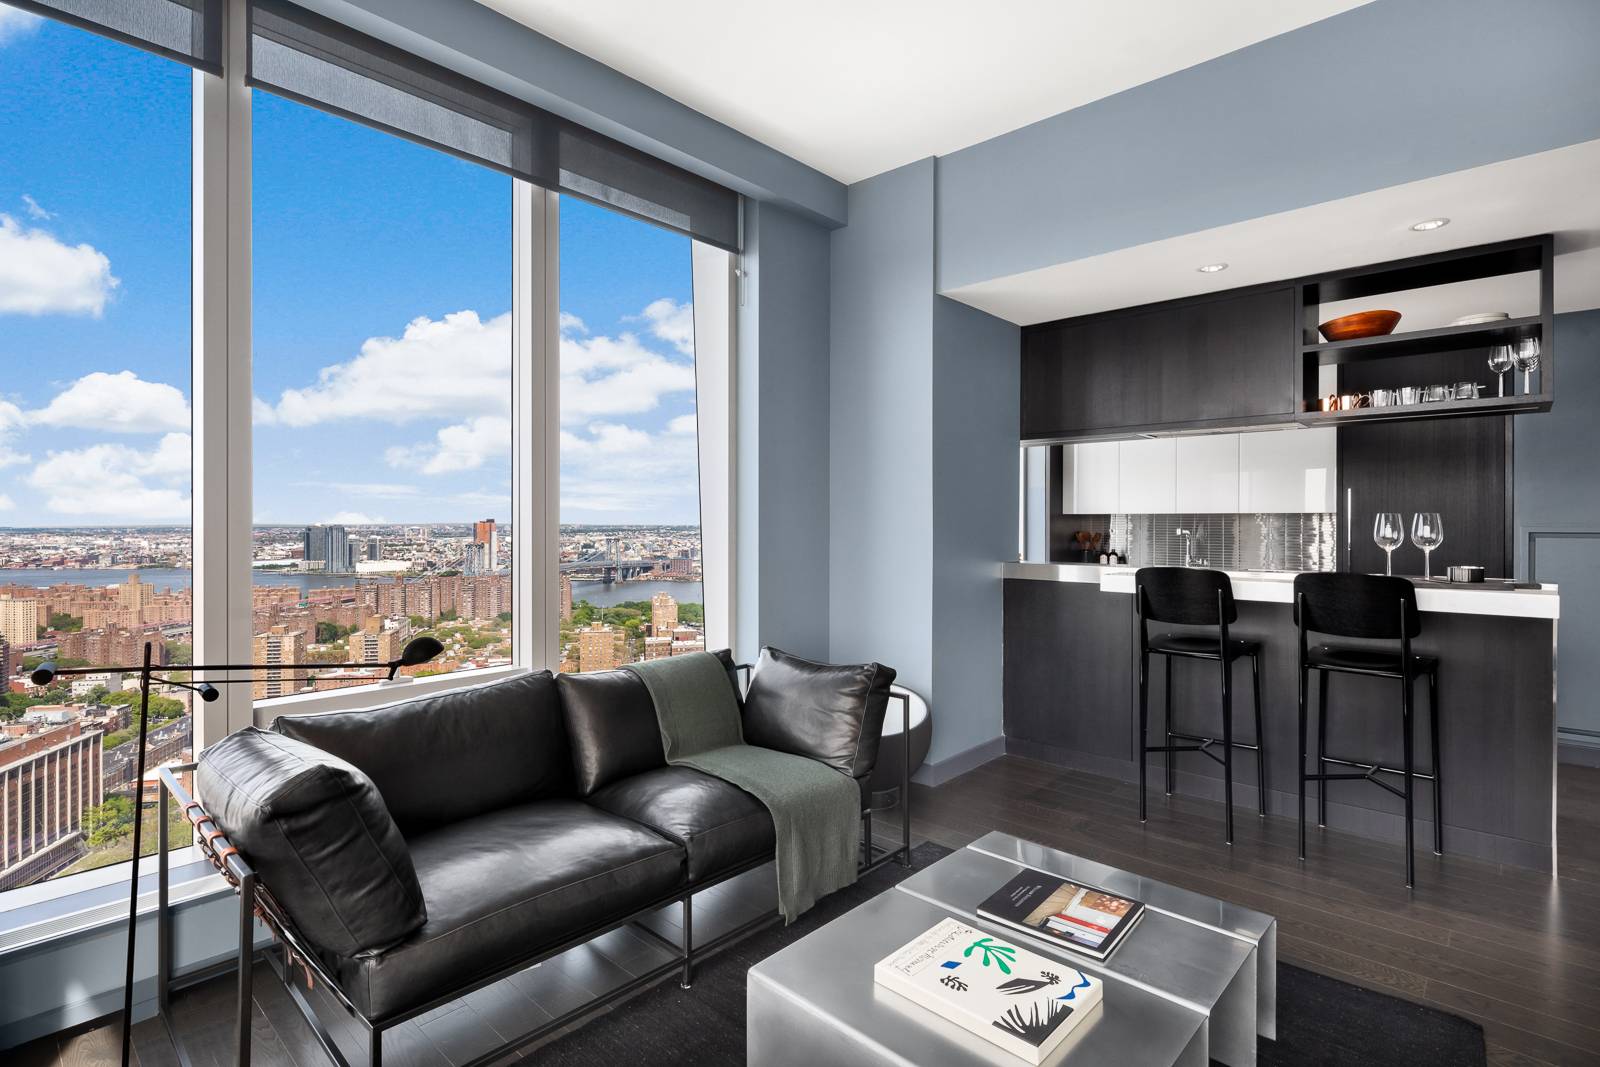 ONE MANHATTAN SQUARE OFFERS ONE OF THE LAST 20 YEAR TAX ABATEMENTS AVAILABLE IN NEW YORK CITY Residence 9L is a 1, 123 square foot two bedroom, two bathroom with ...